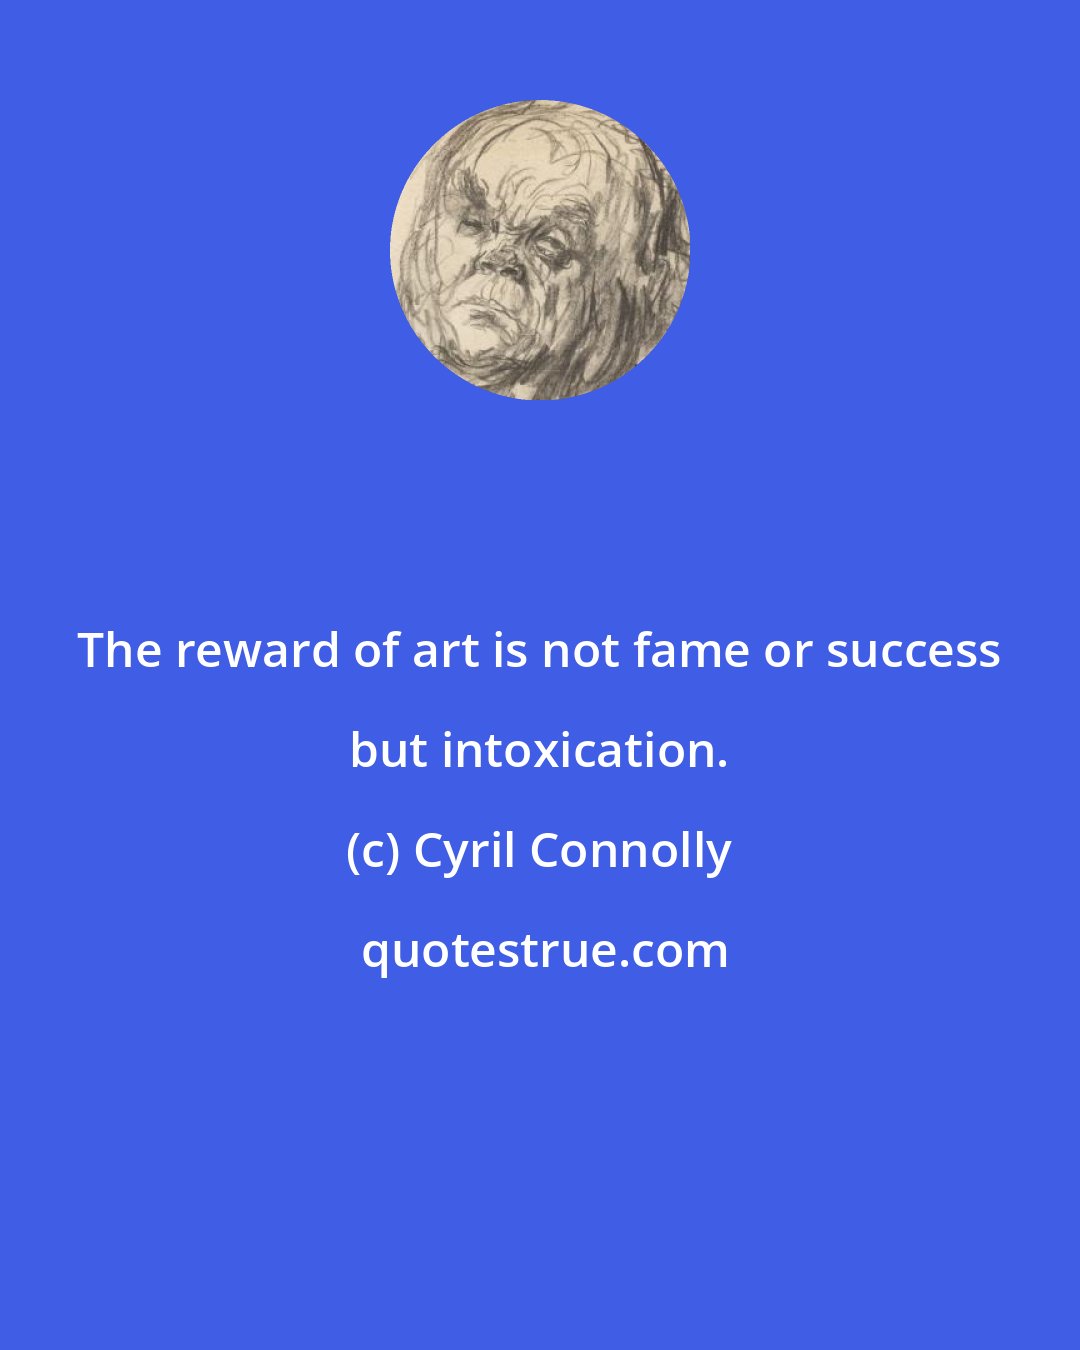 Cyril Connolly: The reward of art is not fame or success but intoxication.